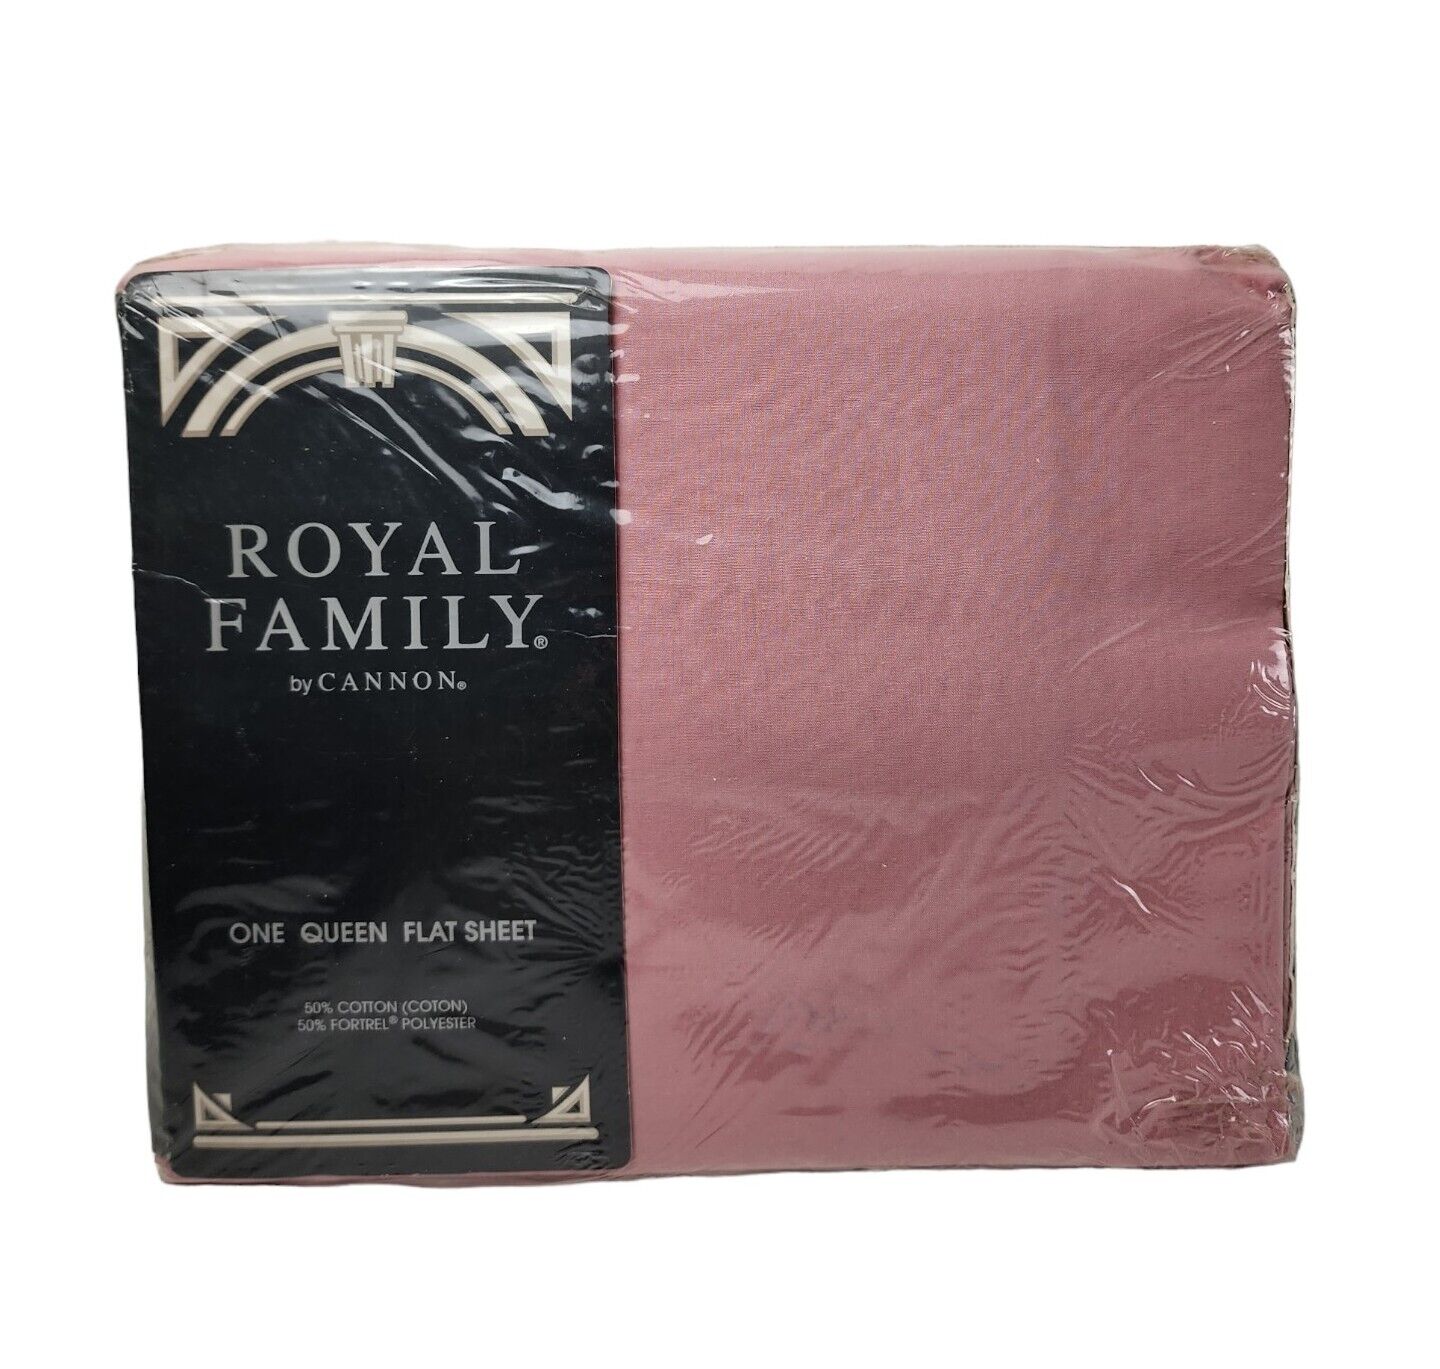 NEW CANNON Royal Family Vintage Pink Queen Flat Sheet